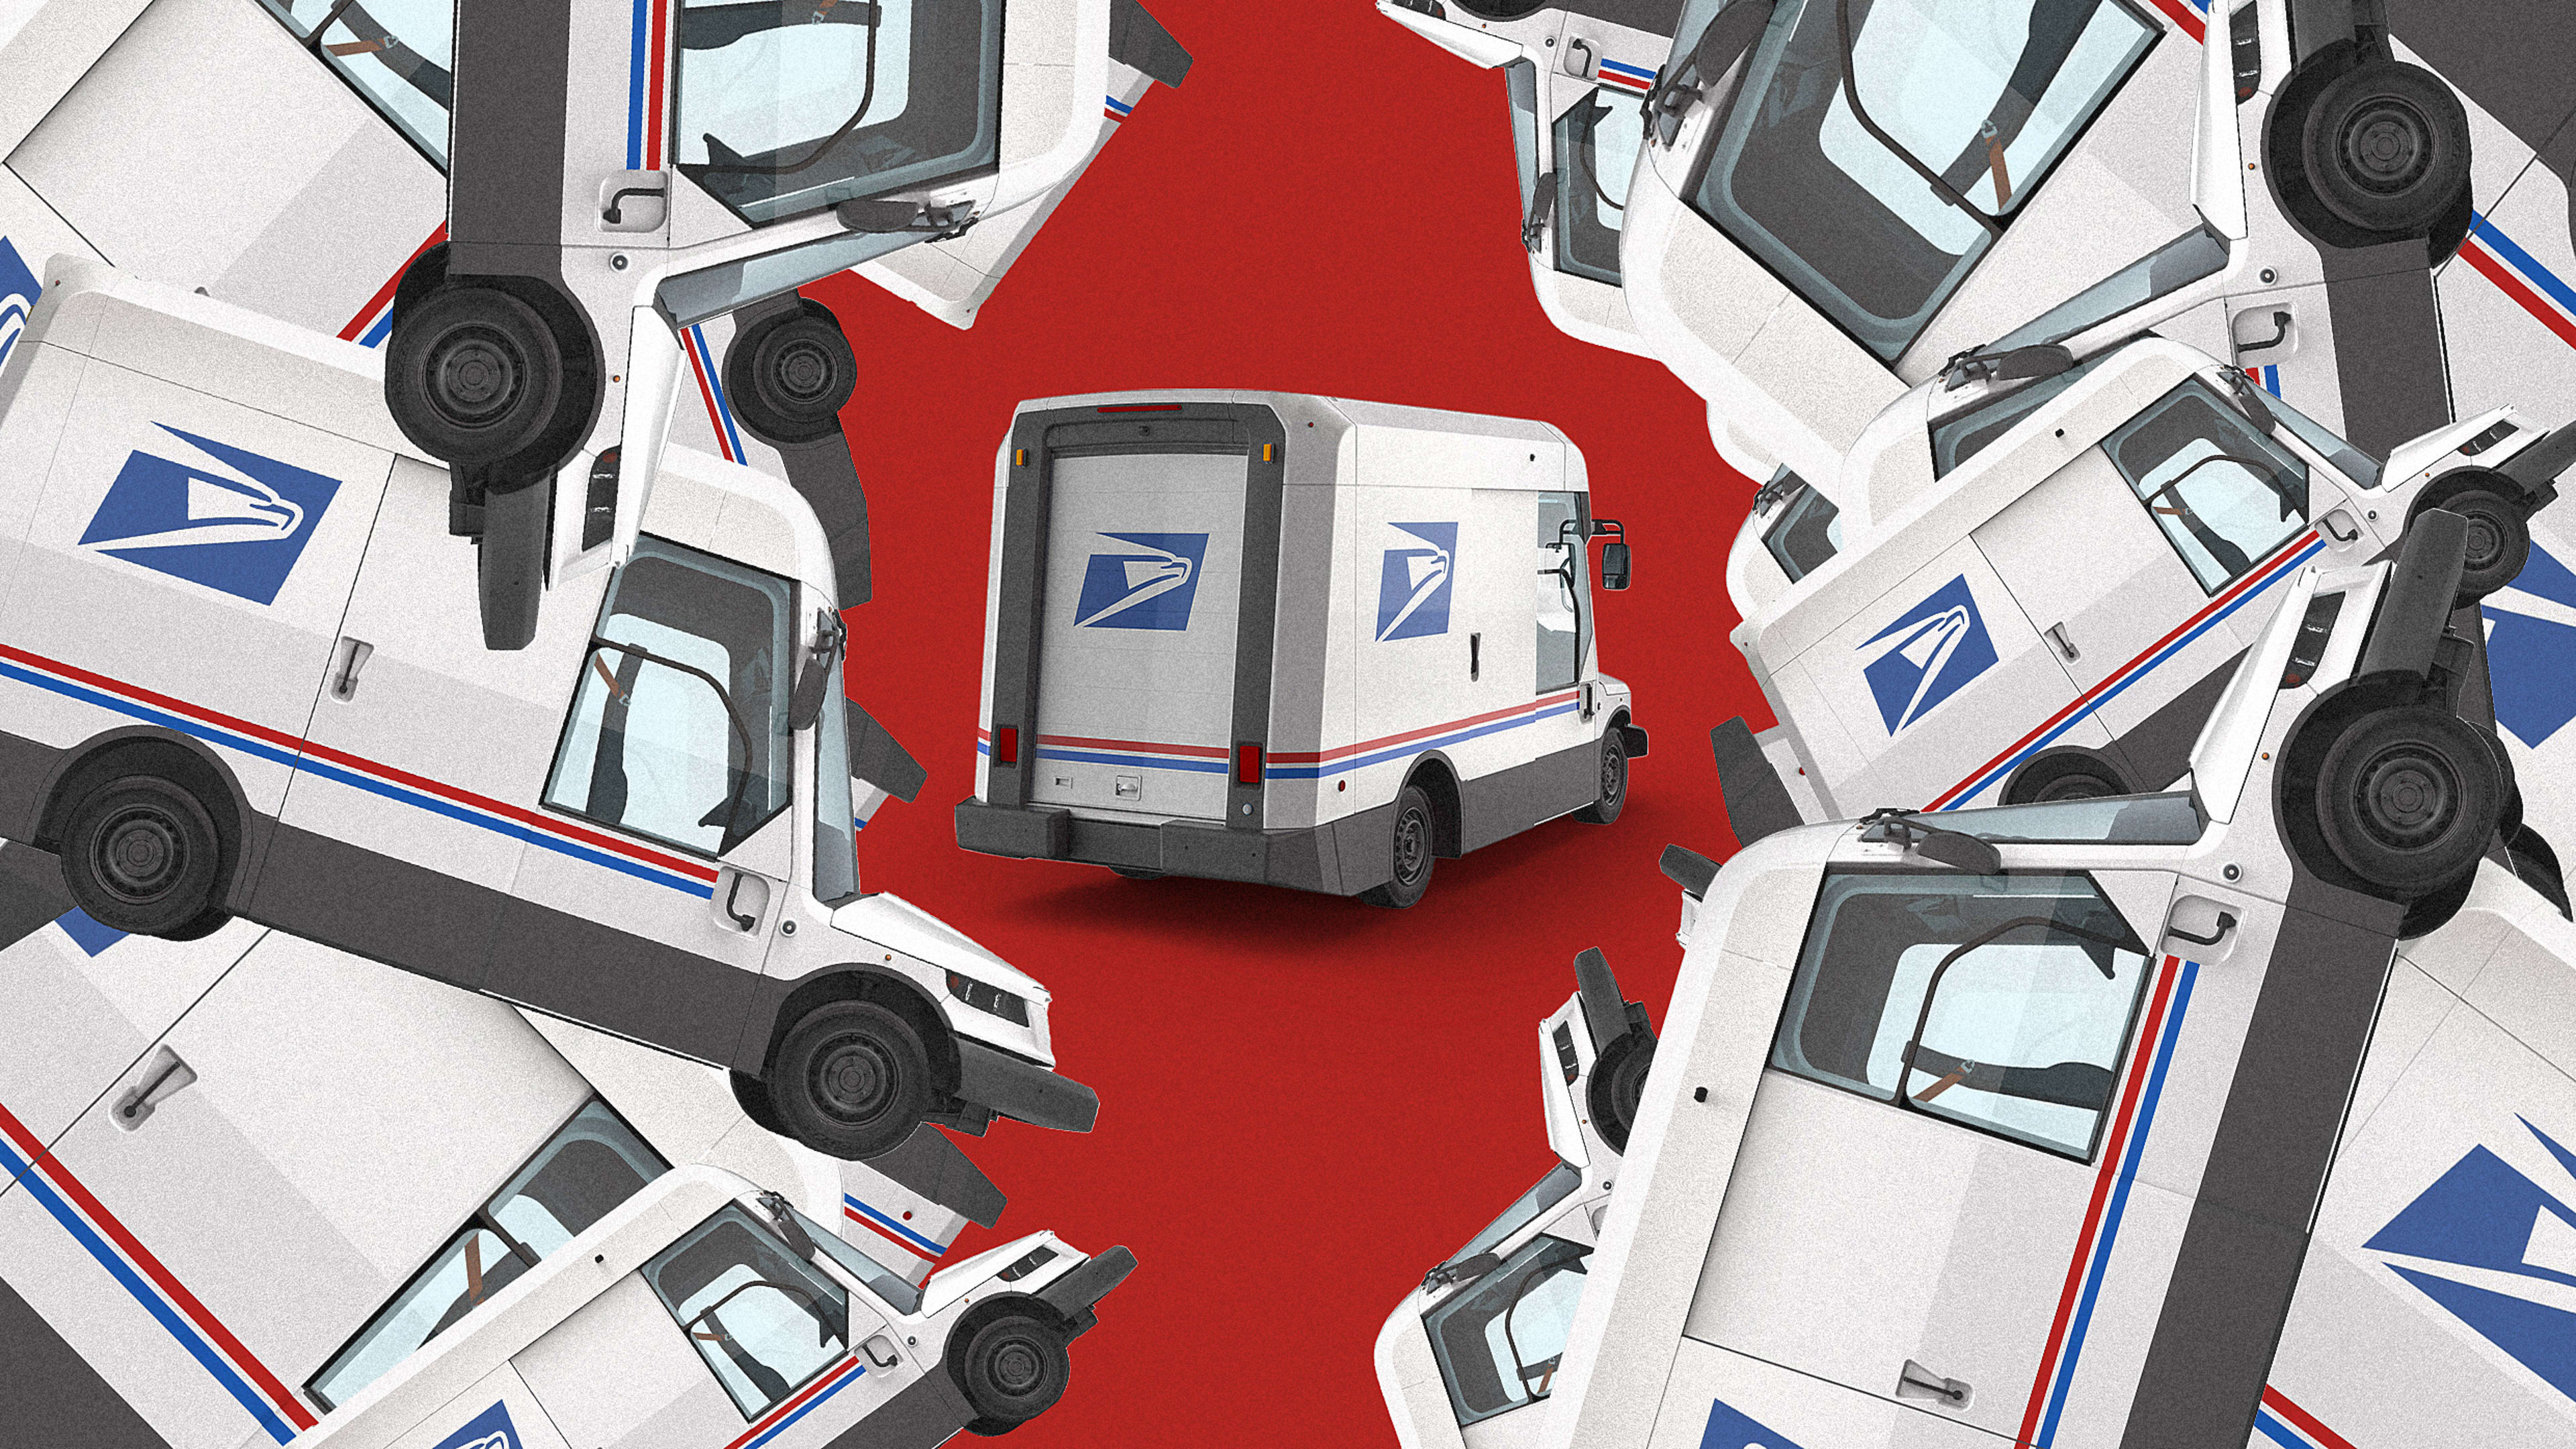 These new lawsuits allege USPS broke the law with its plan to buy gas-guzzling trucks